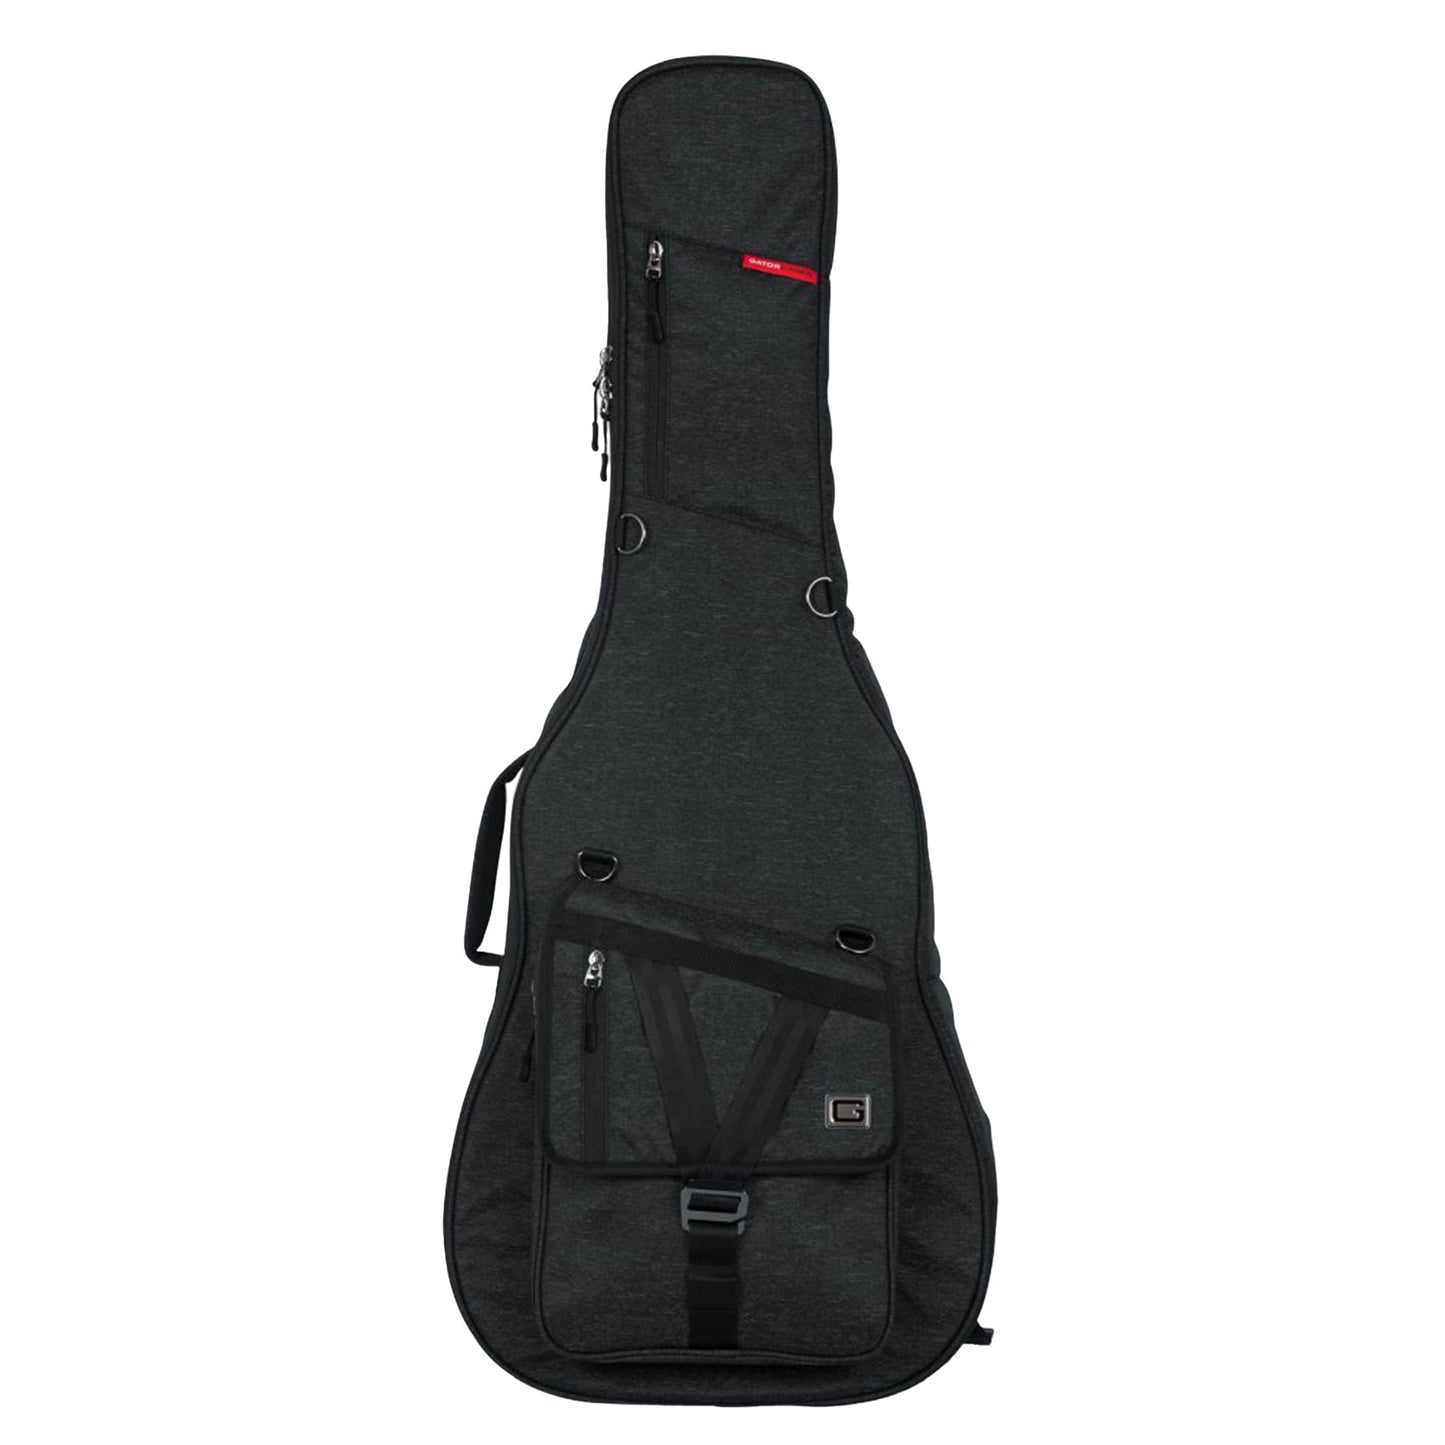 Gator Transit Acoustic Guitar Gig Bag Charcoal Black Accessories / Cases and Gig Bags / Guitar Cases